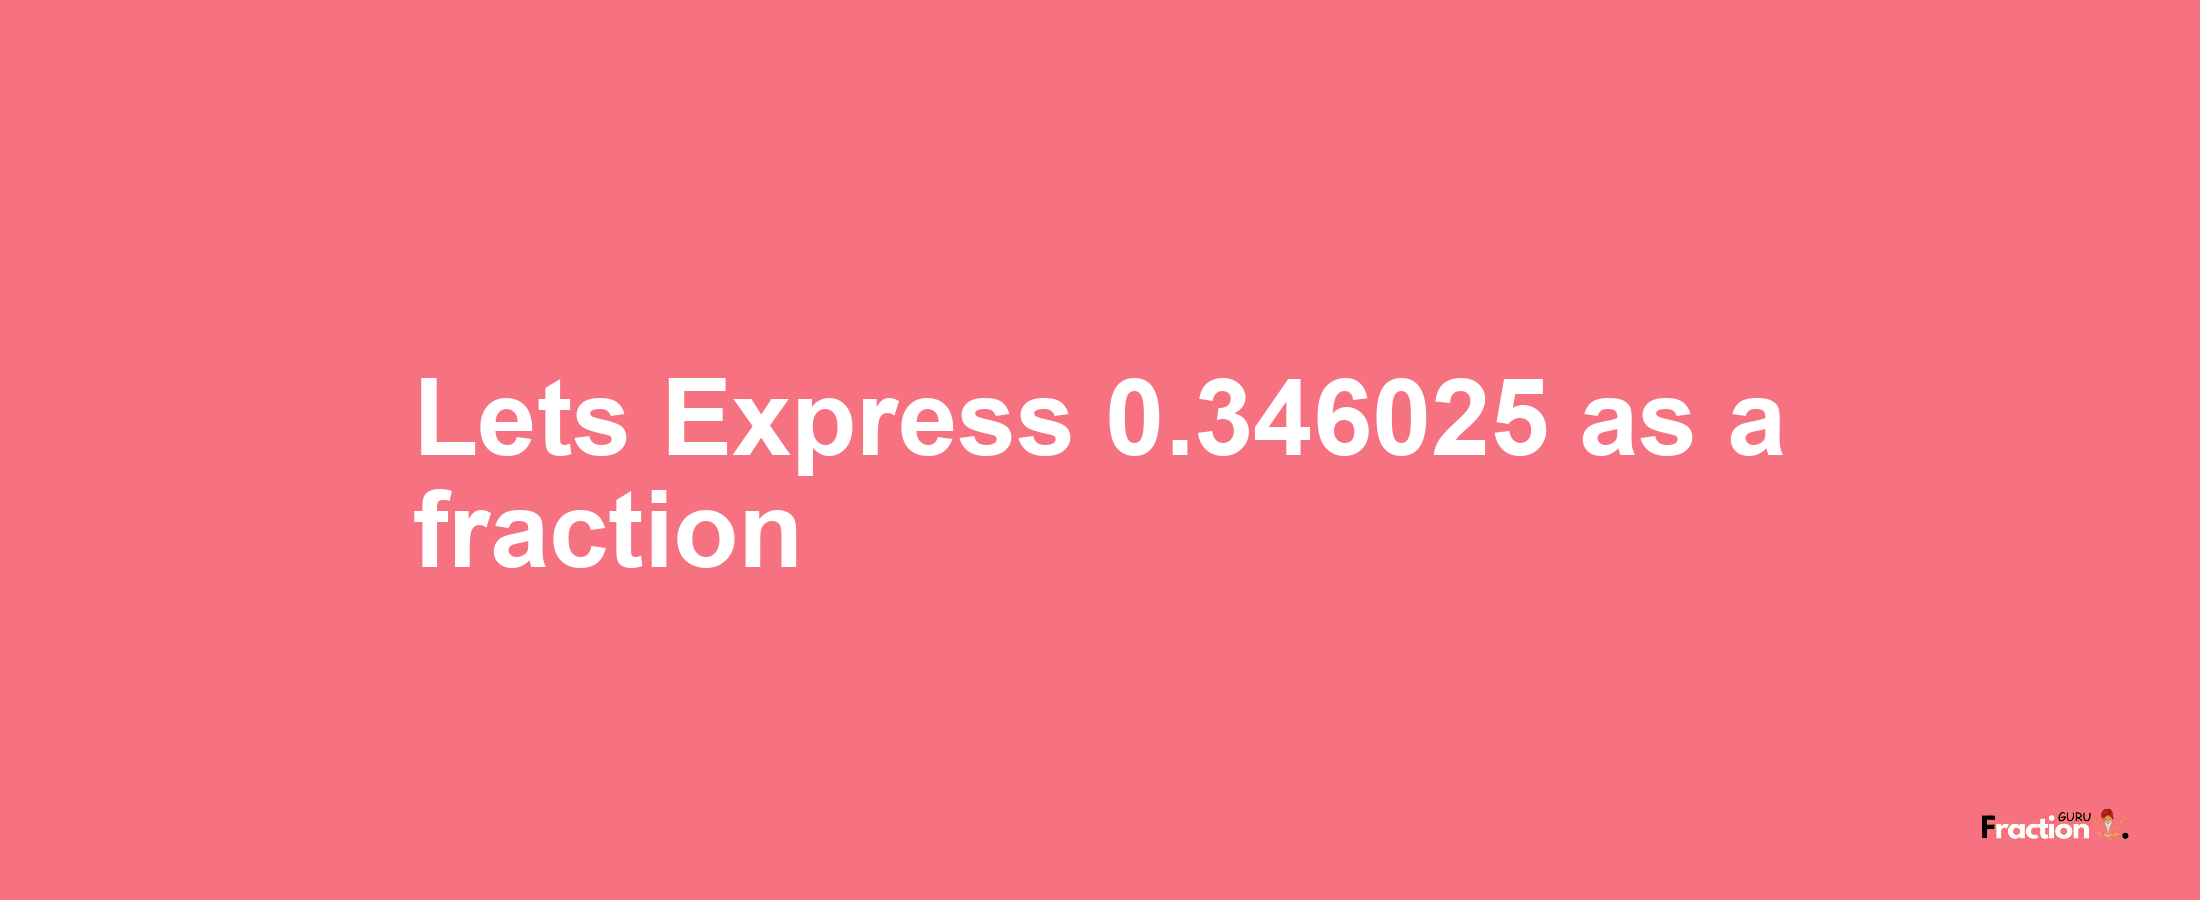 Lets Express 0.346025 as afraction